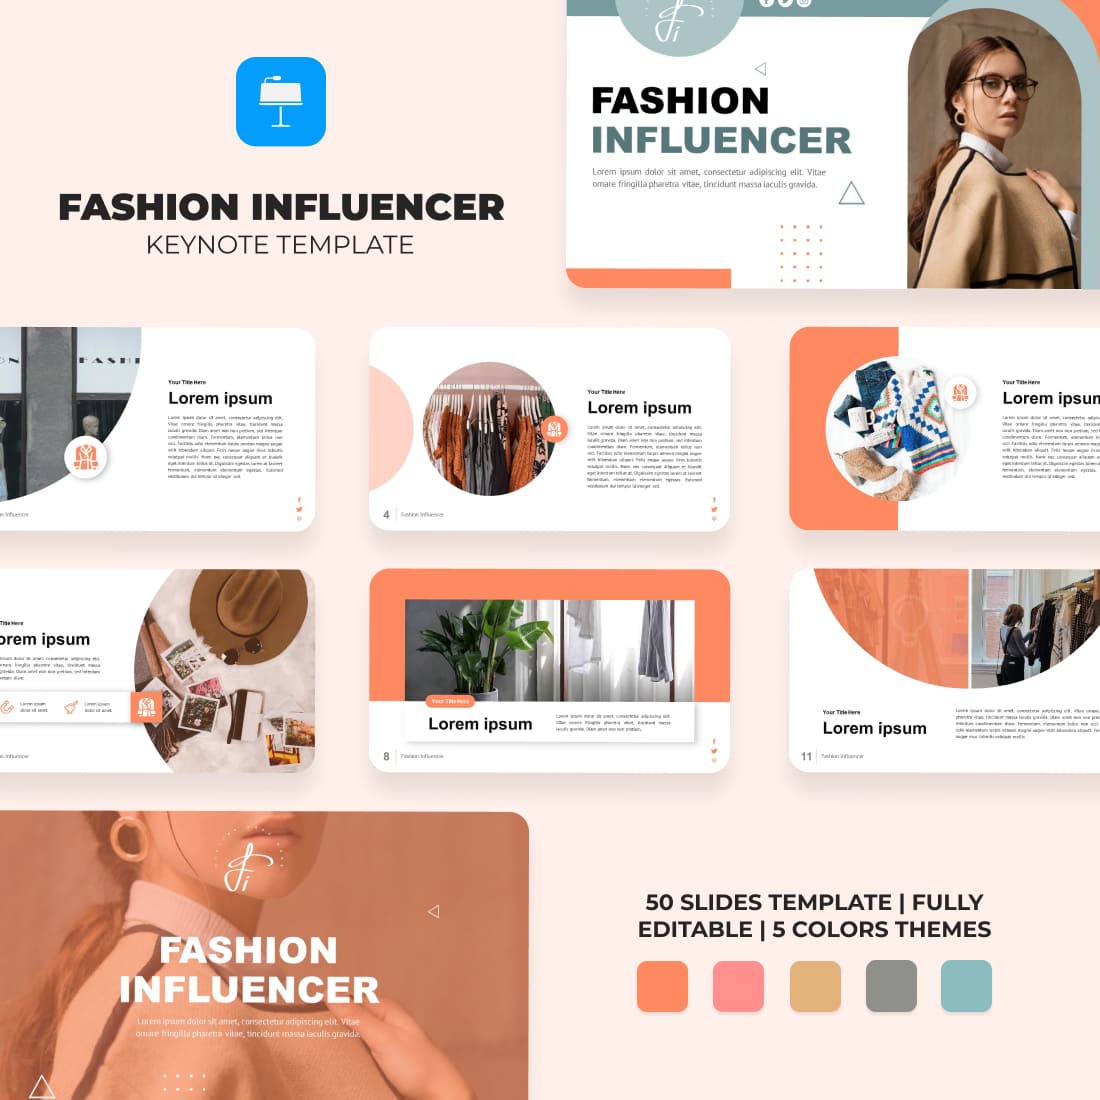 Fashion Influencer Keynote Template cover.